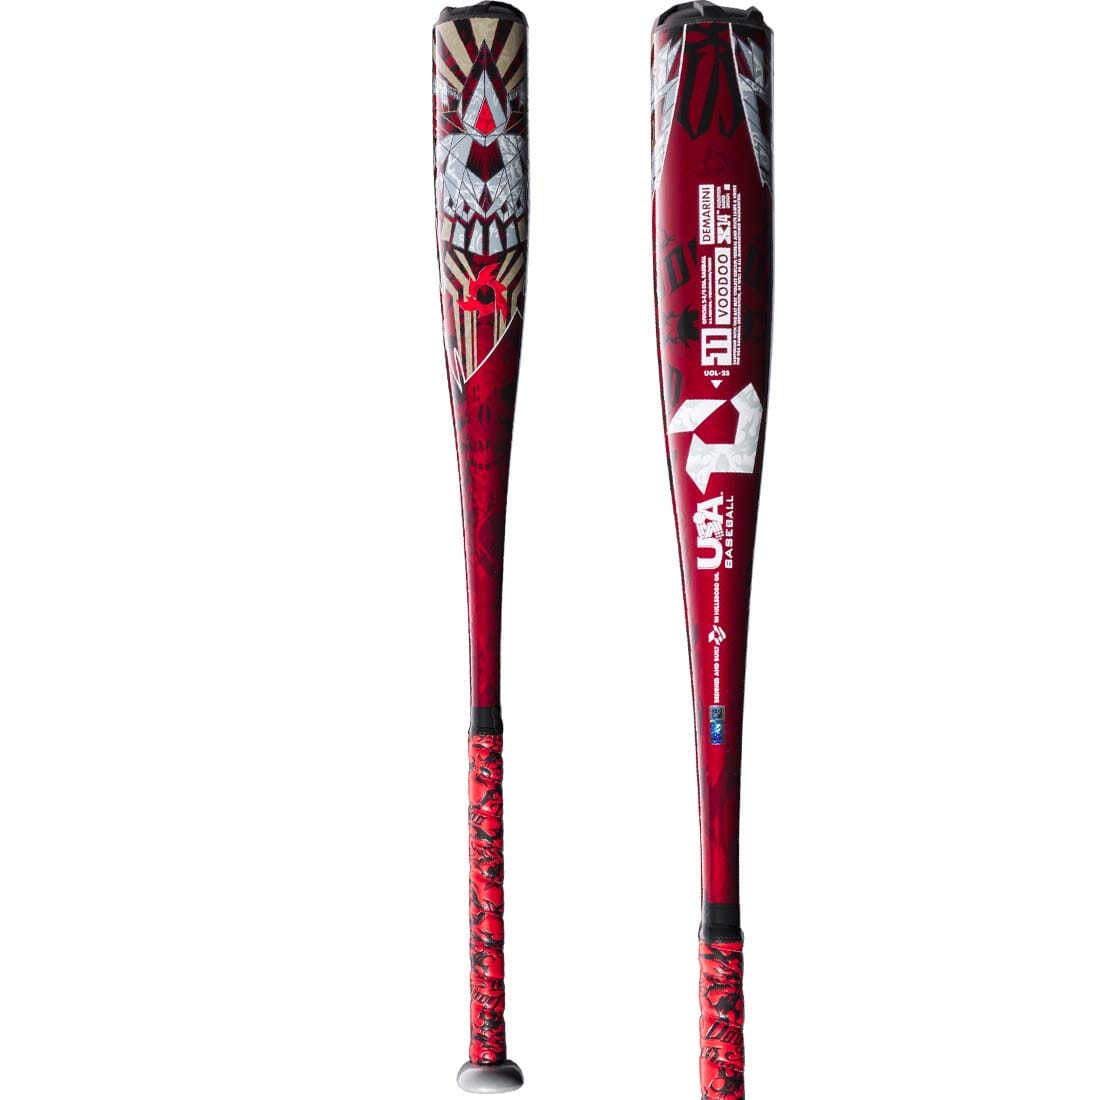 Slugger VooDoo WBD2360010 Bat from ProRollers Hot